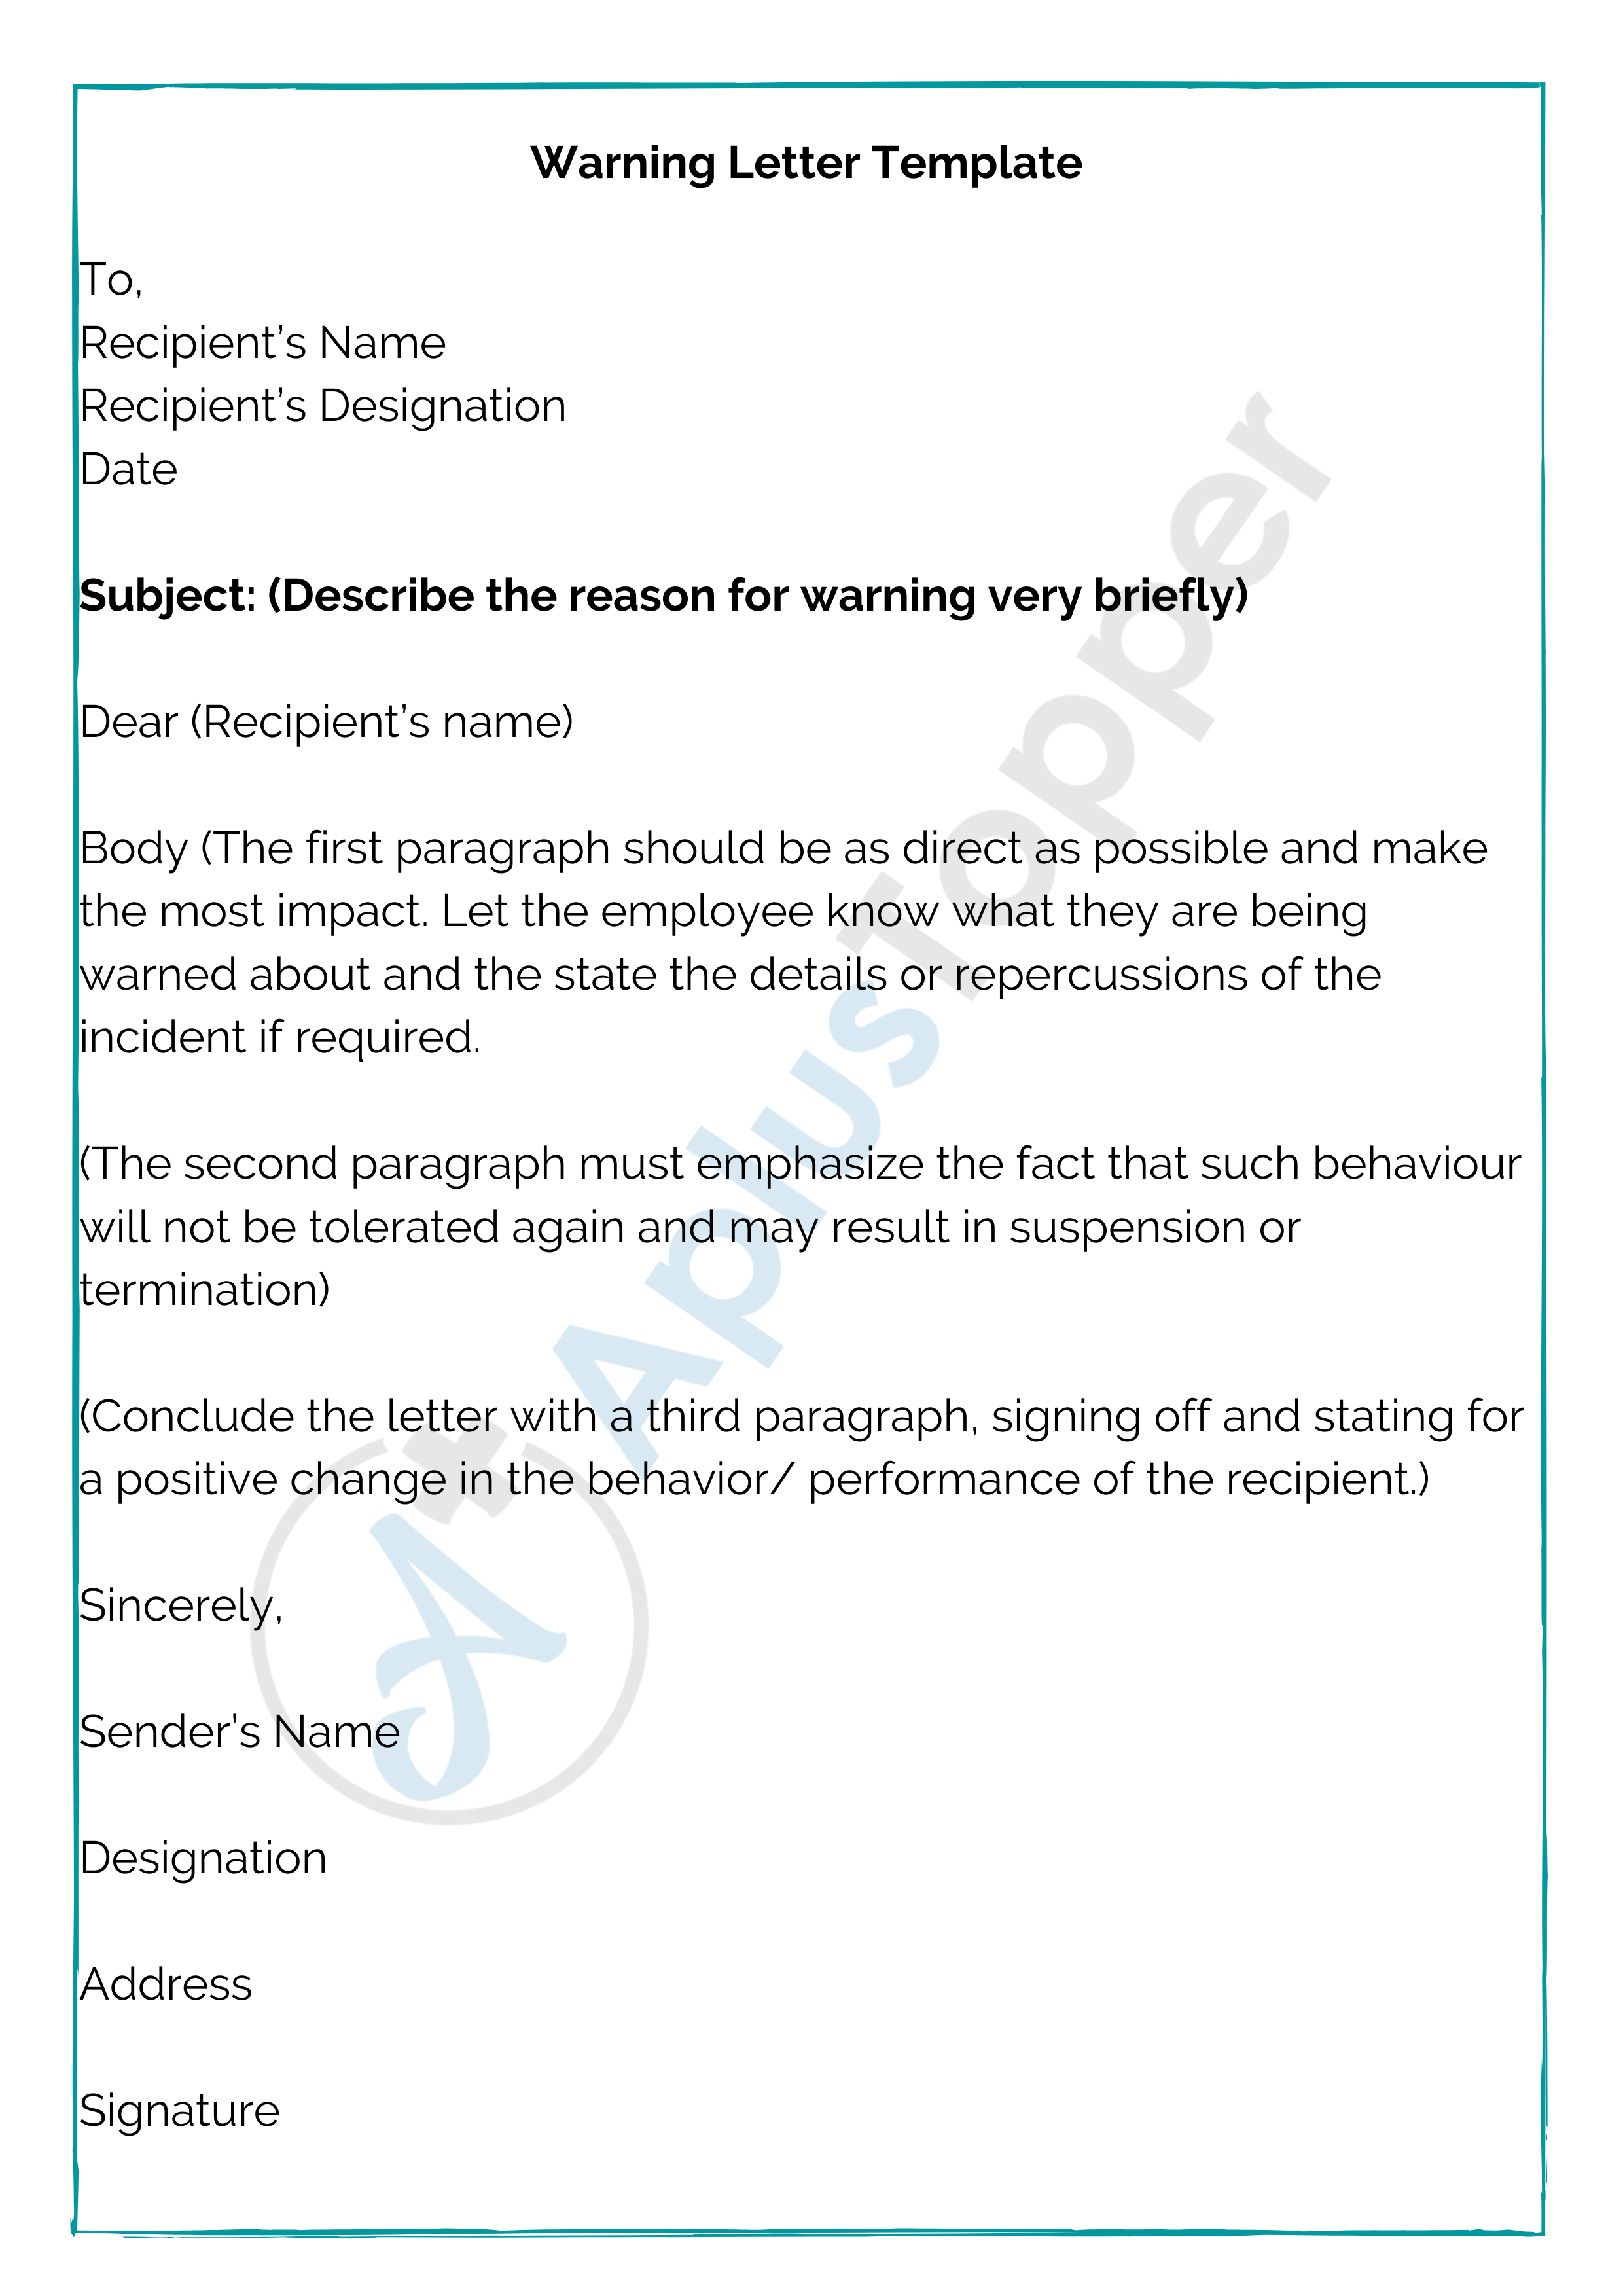 Warning Letter How To Write a Warning Letter?, Template, Samples A